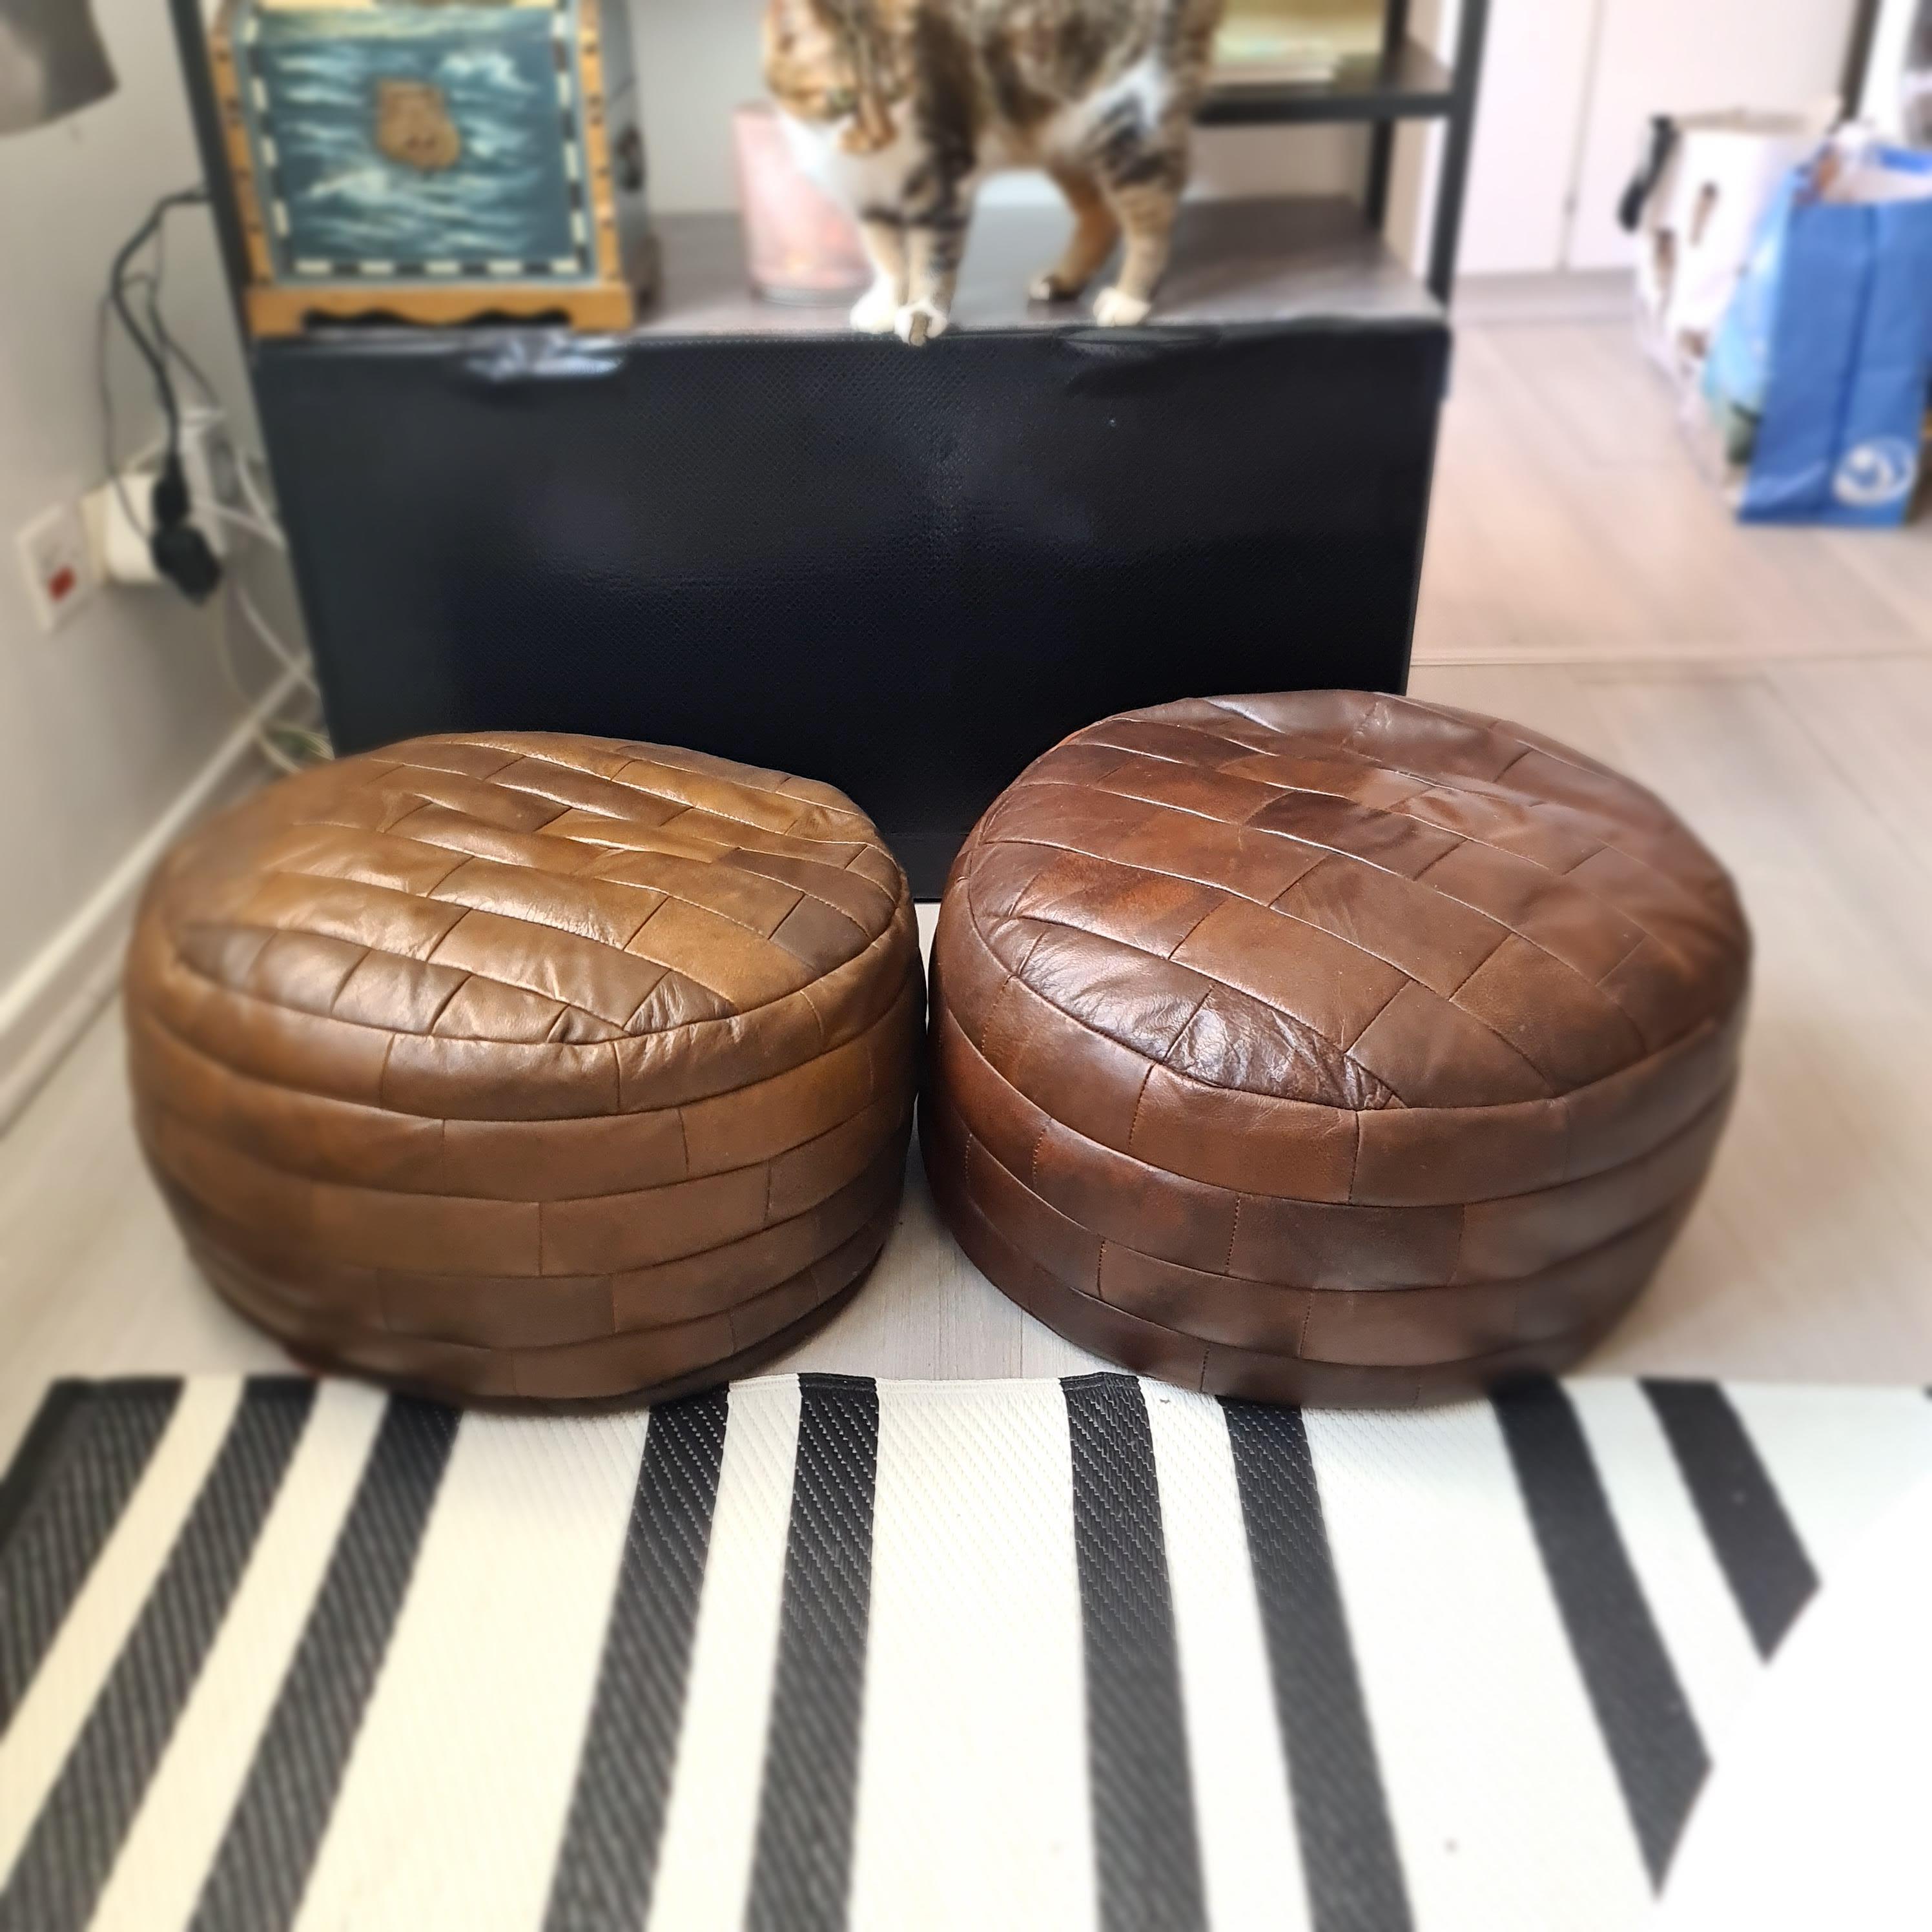 Elegant Pair of Sede Patchwork Poufs, Unique and Comfortable

Looking for exceptional furniture to give character to your interior? Discover this stunning pair of de Sede patchwork poufs, a harmonious blend of style, comfort and quality